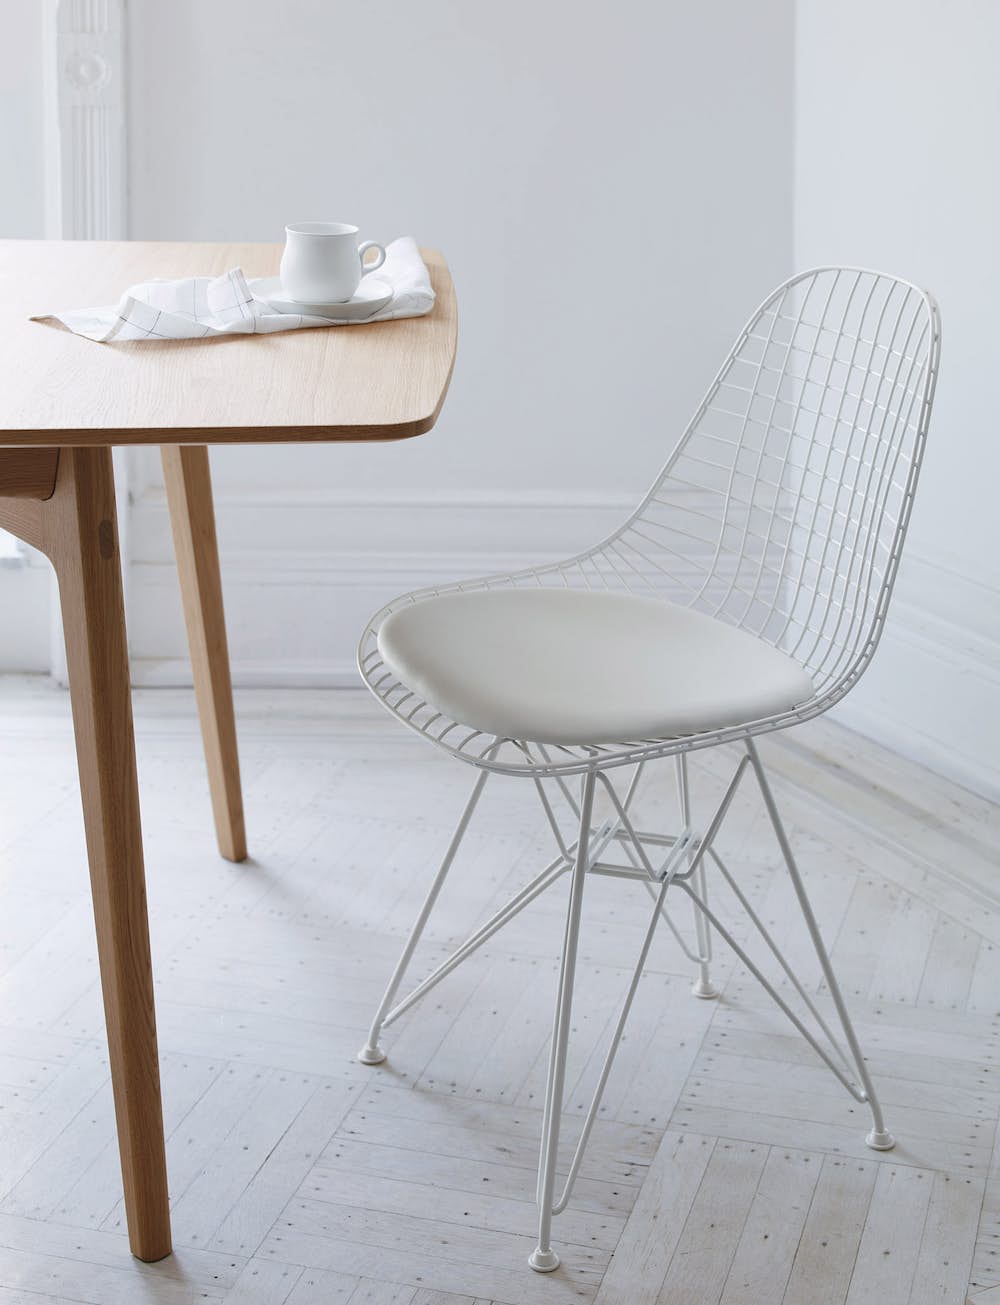 Eames Wire Side Chair with Seat Pad at a dining table